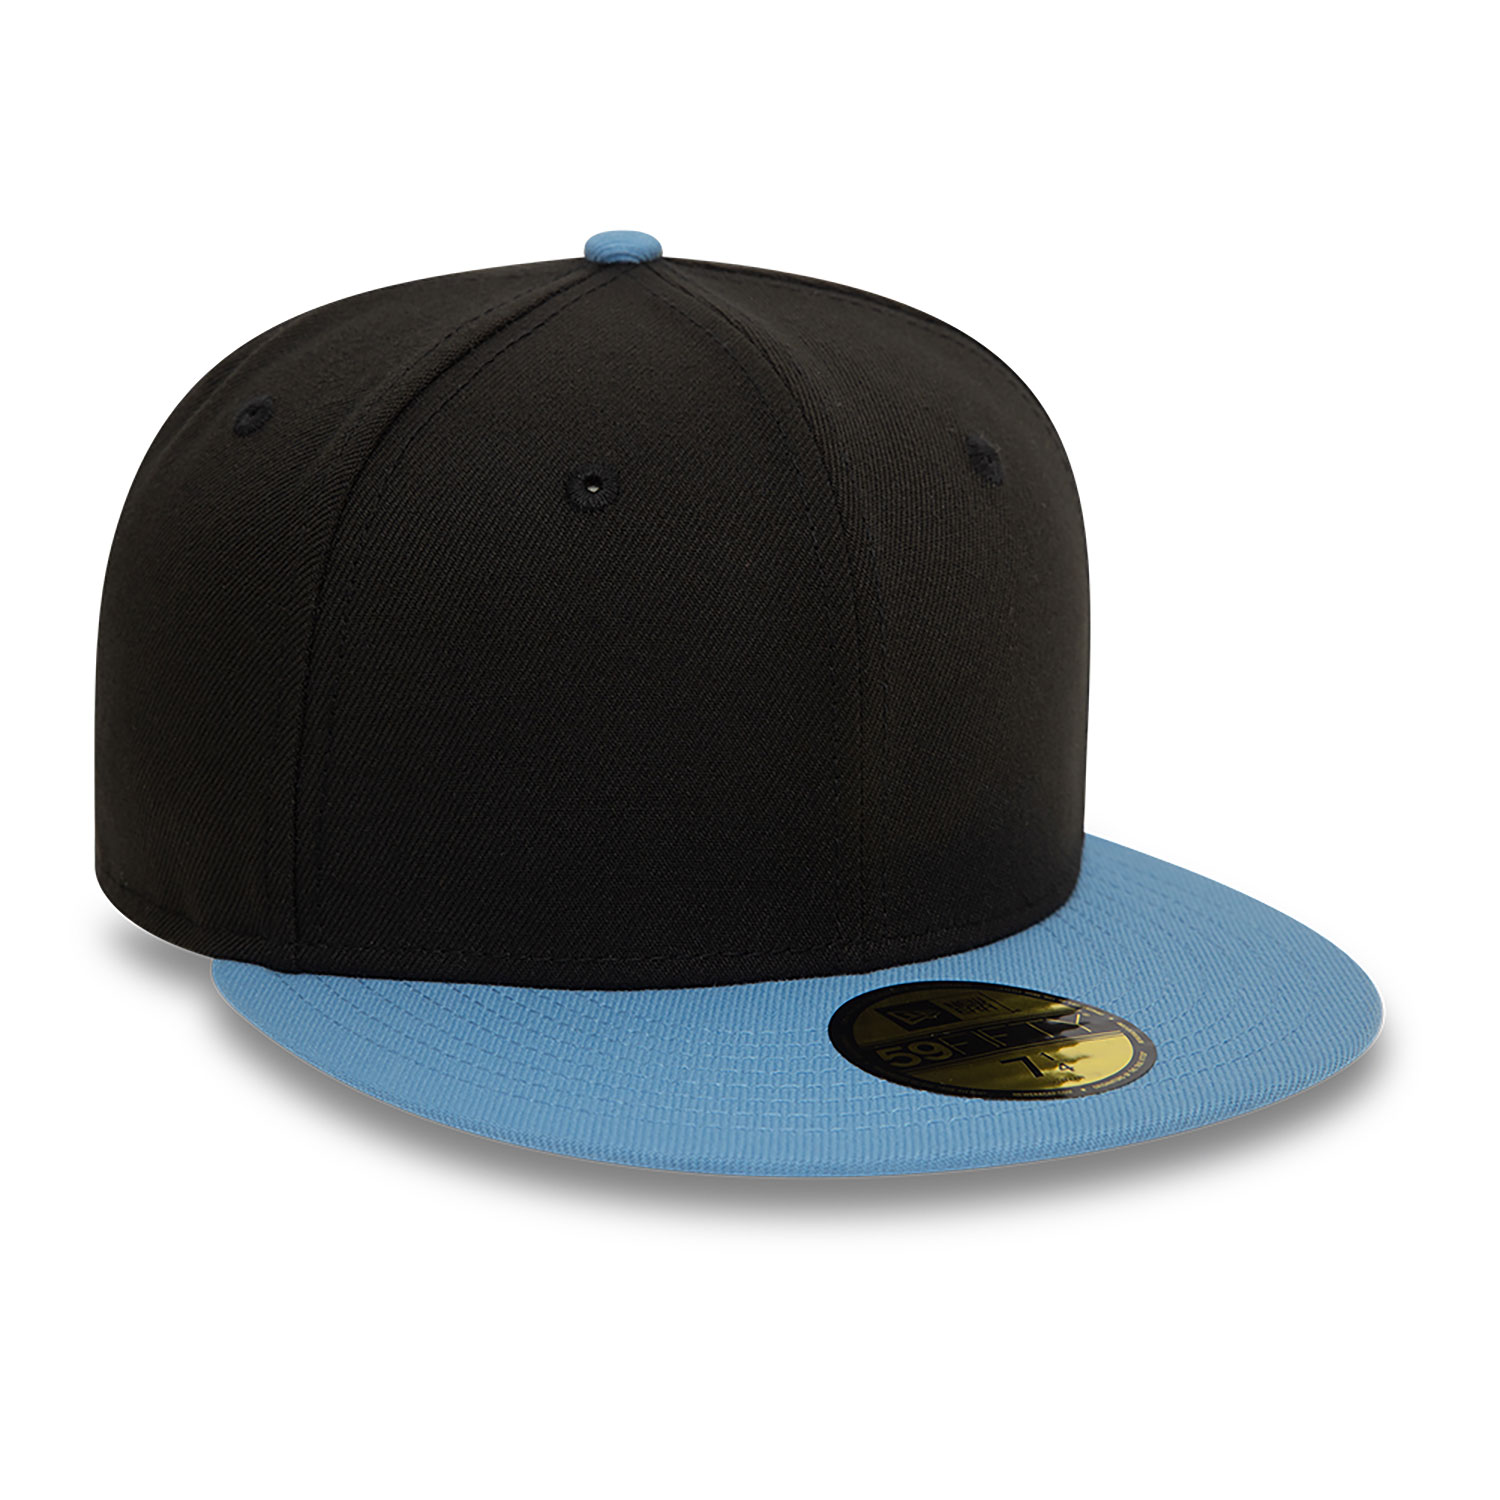 New Era Contrast Crown Black and Blue 59FIFTY Fitted Cap